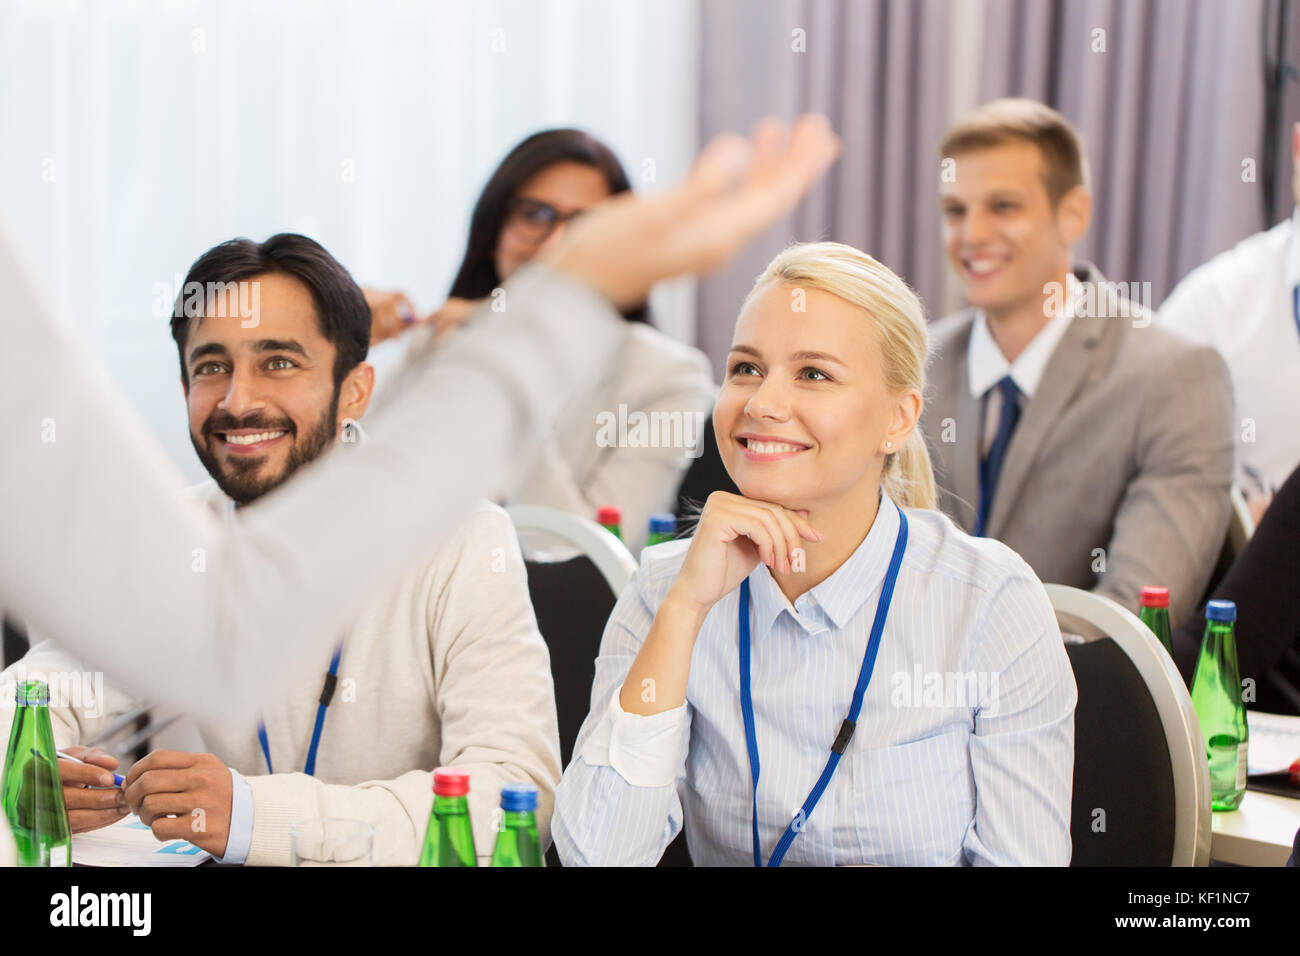 group of people at business conference or lecture Stock Photo